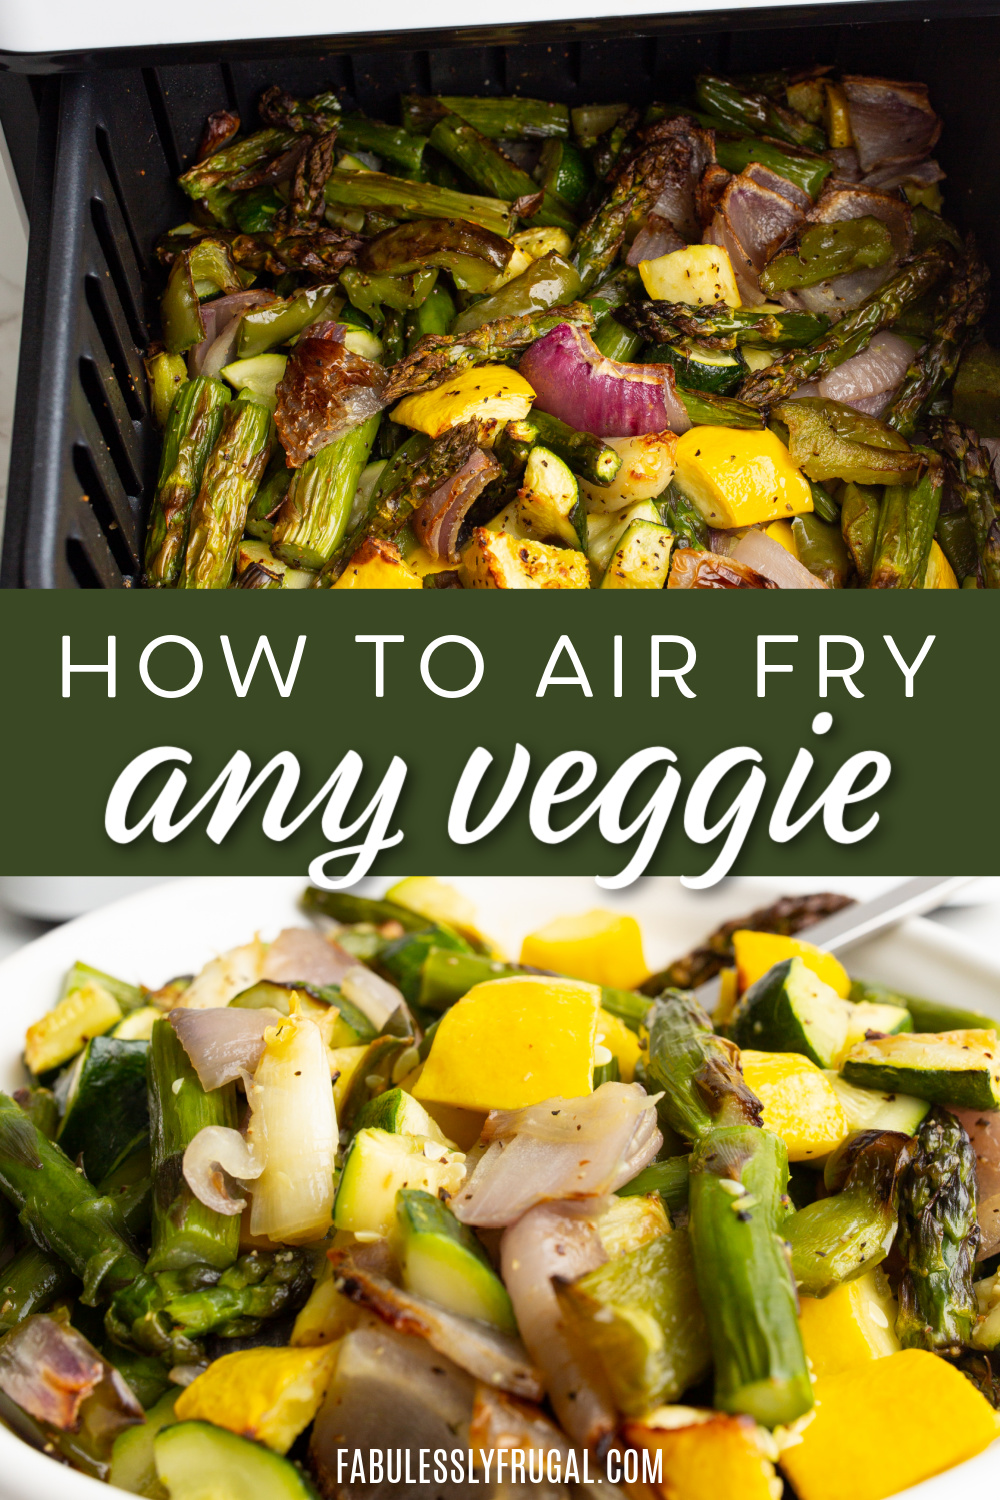 How to Air Fry Every Type of Vegetable